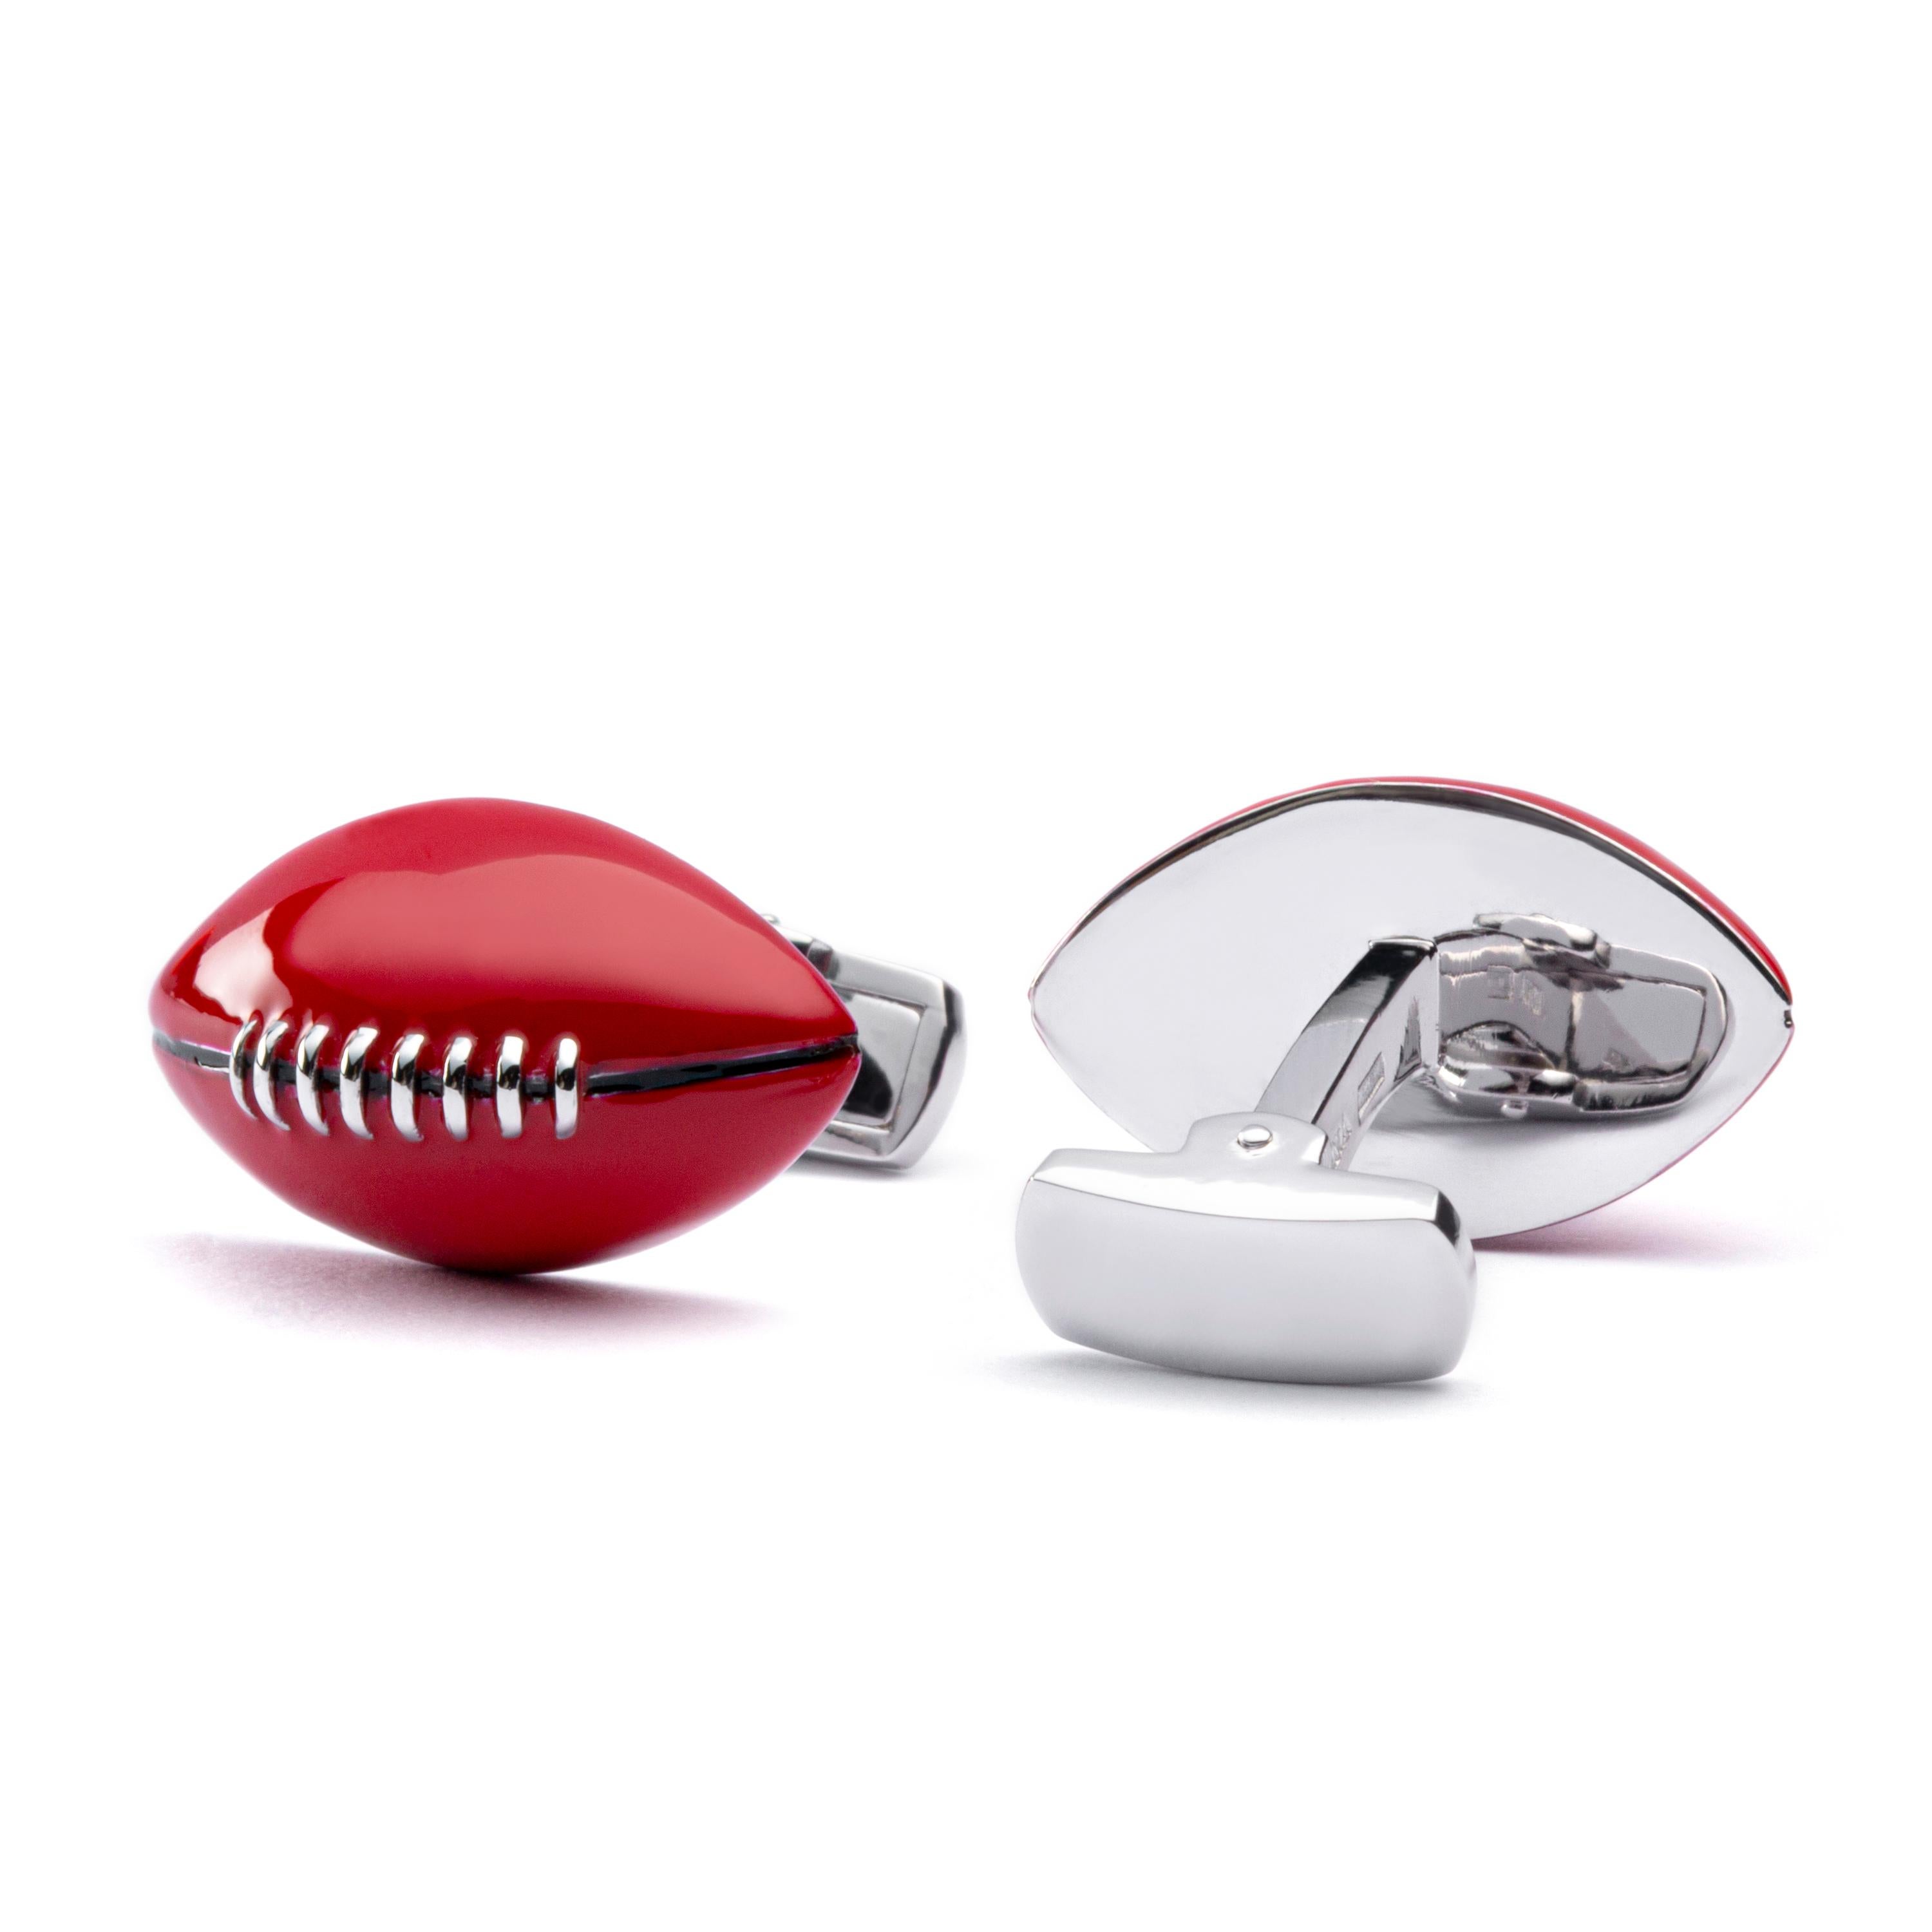 Jona design collection, hand crafted in Italy, sterling silver and red enamel rugby ball cufflinks. Marked 